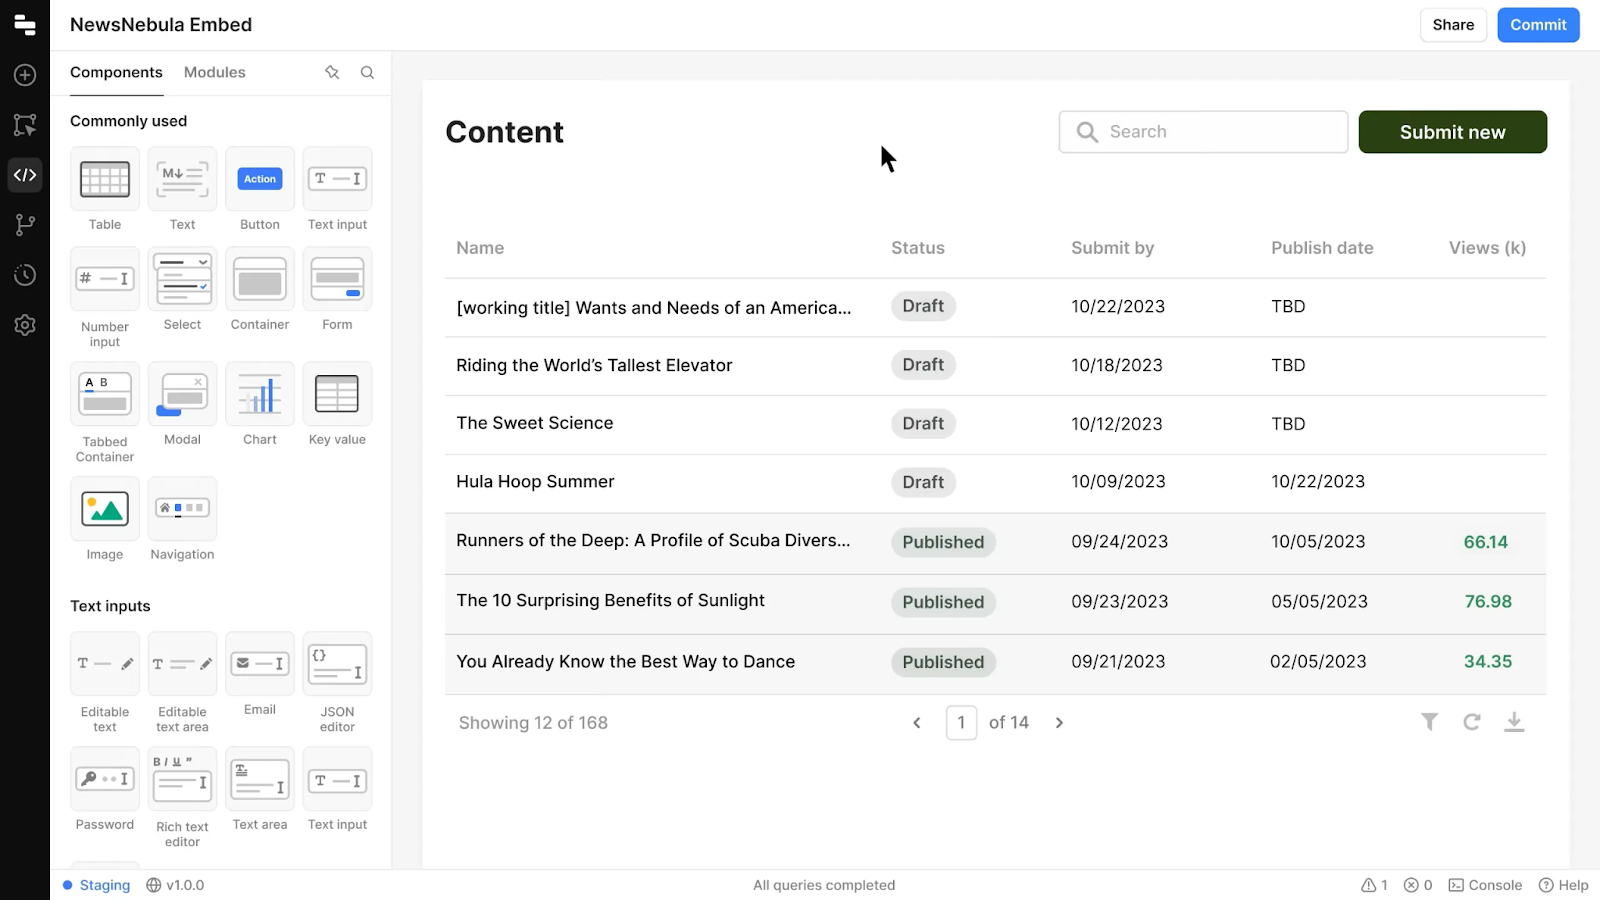 Screenshot of a content management system interface displaying various draft and published articles, with tools for submitting and editing content.